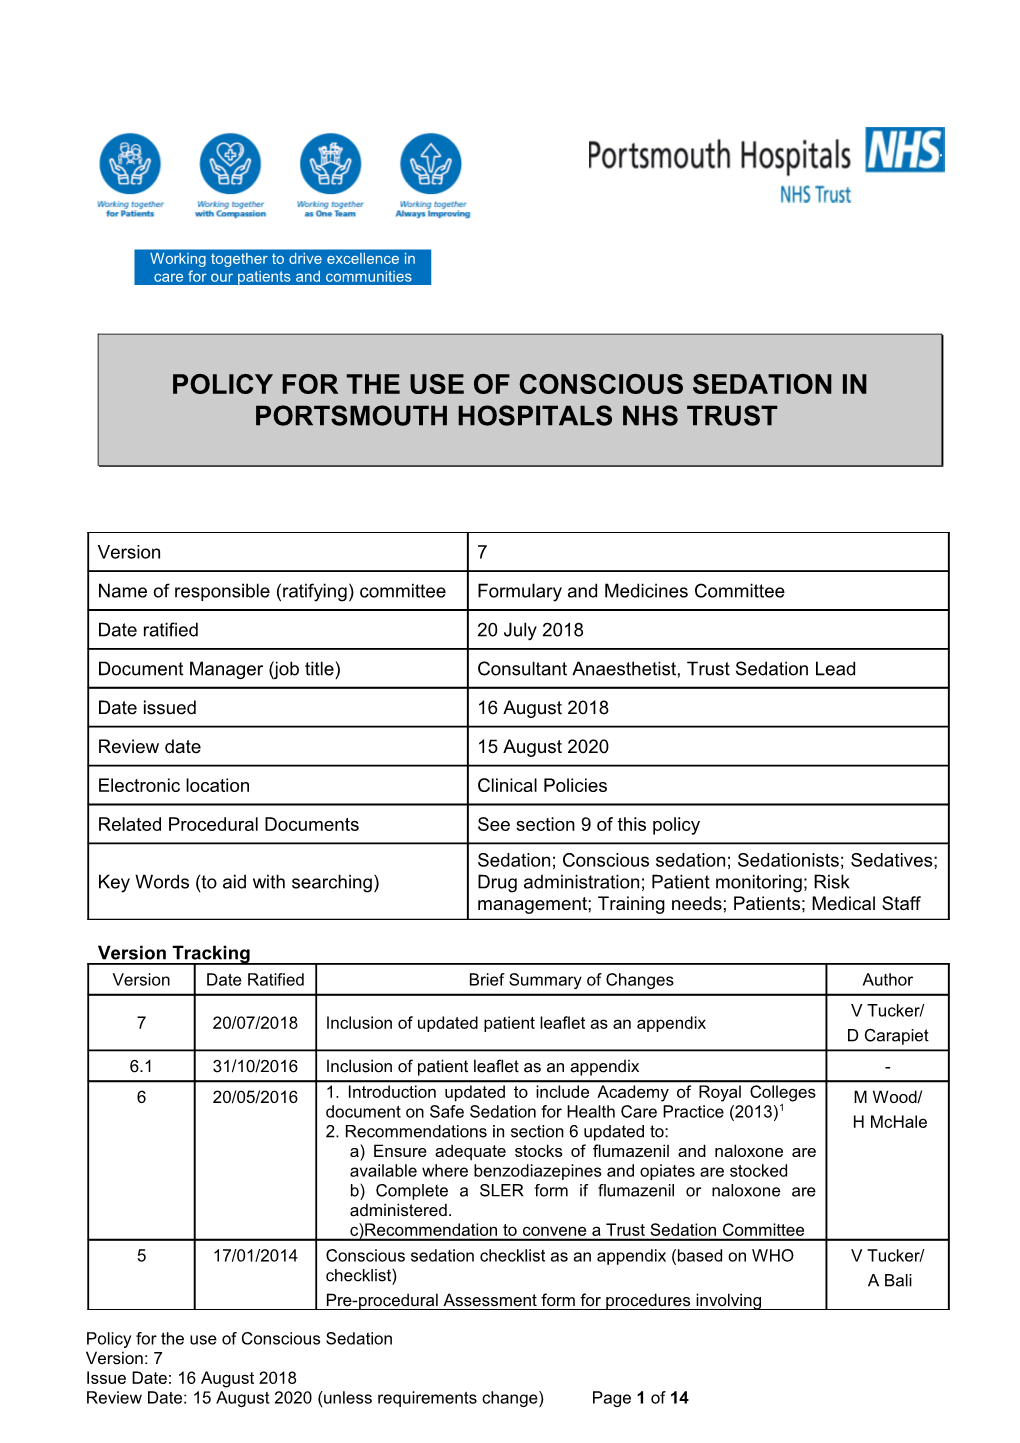 Policy for the Use of Conscious Sedation in Portsmouth Hospitals Nhs Trust